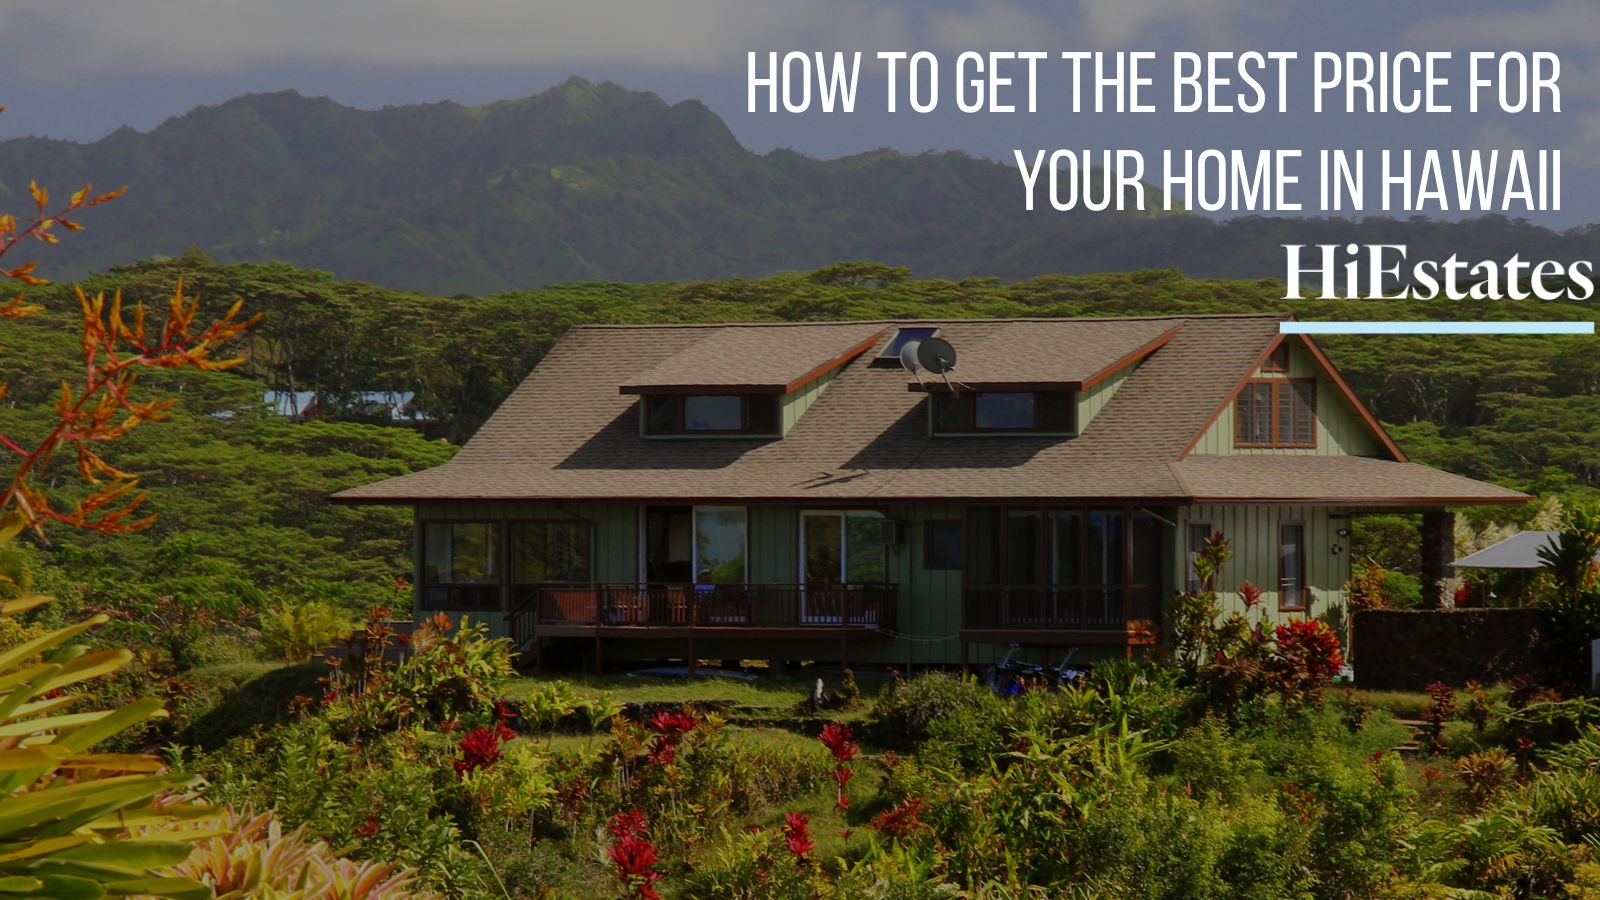 How to Get the Best Price for Your Home in Hawaii